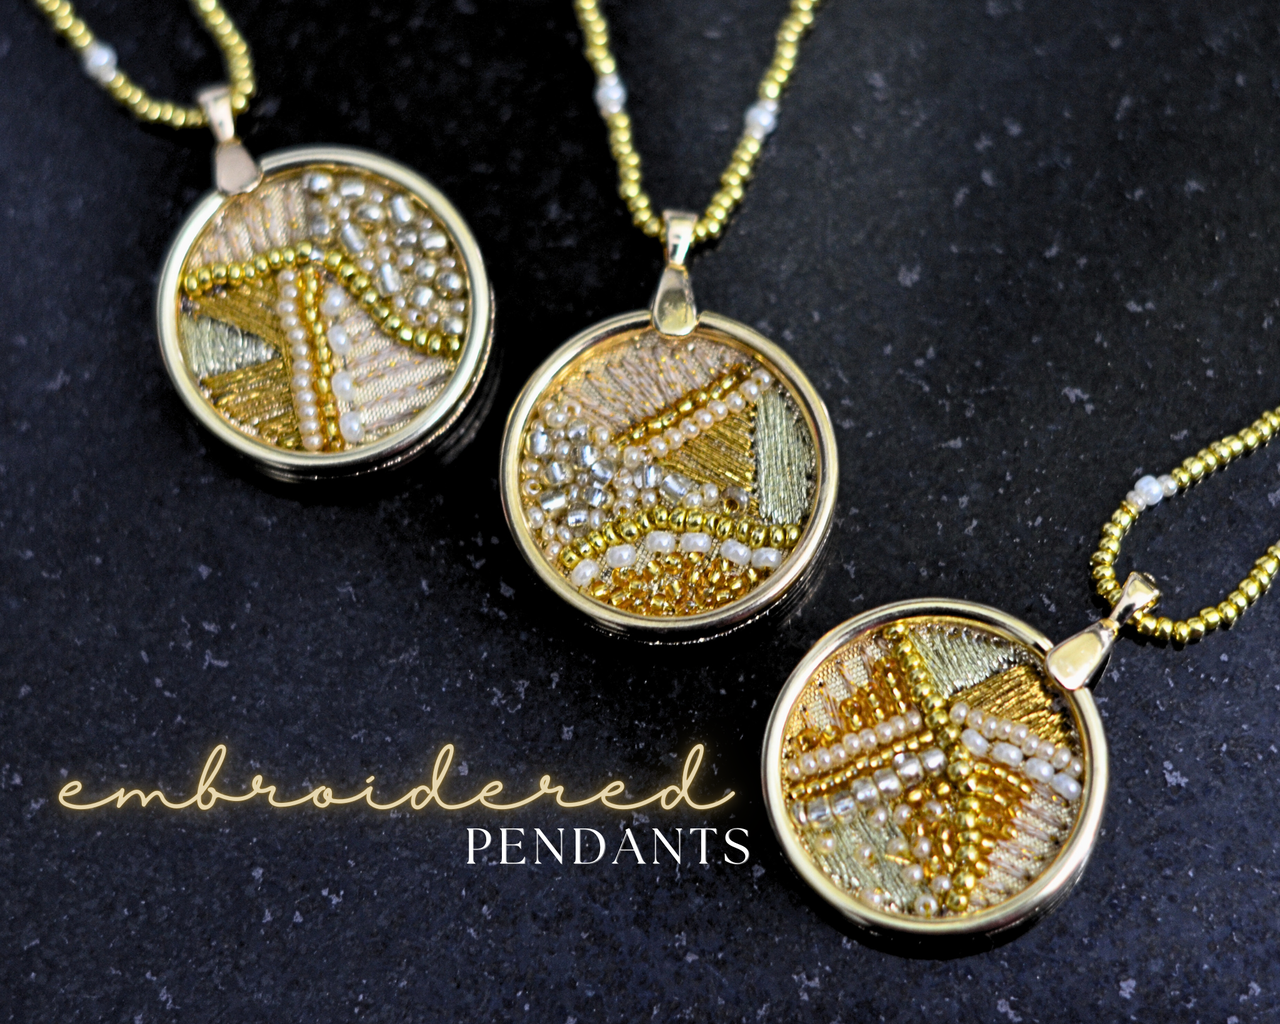 Abstract Embroidered Pendants